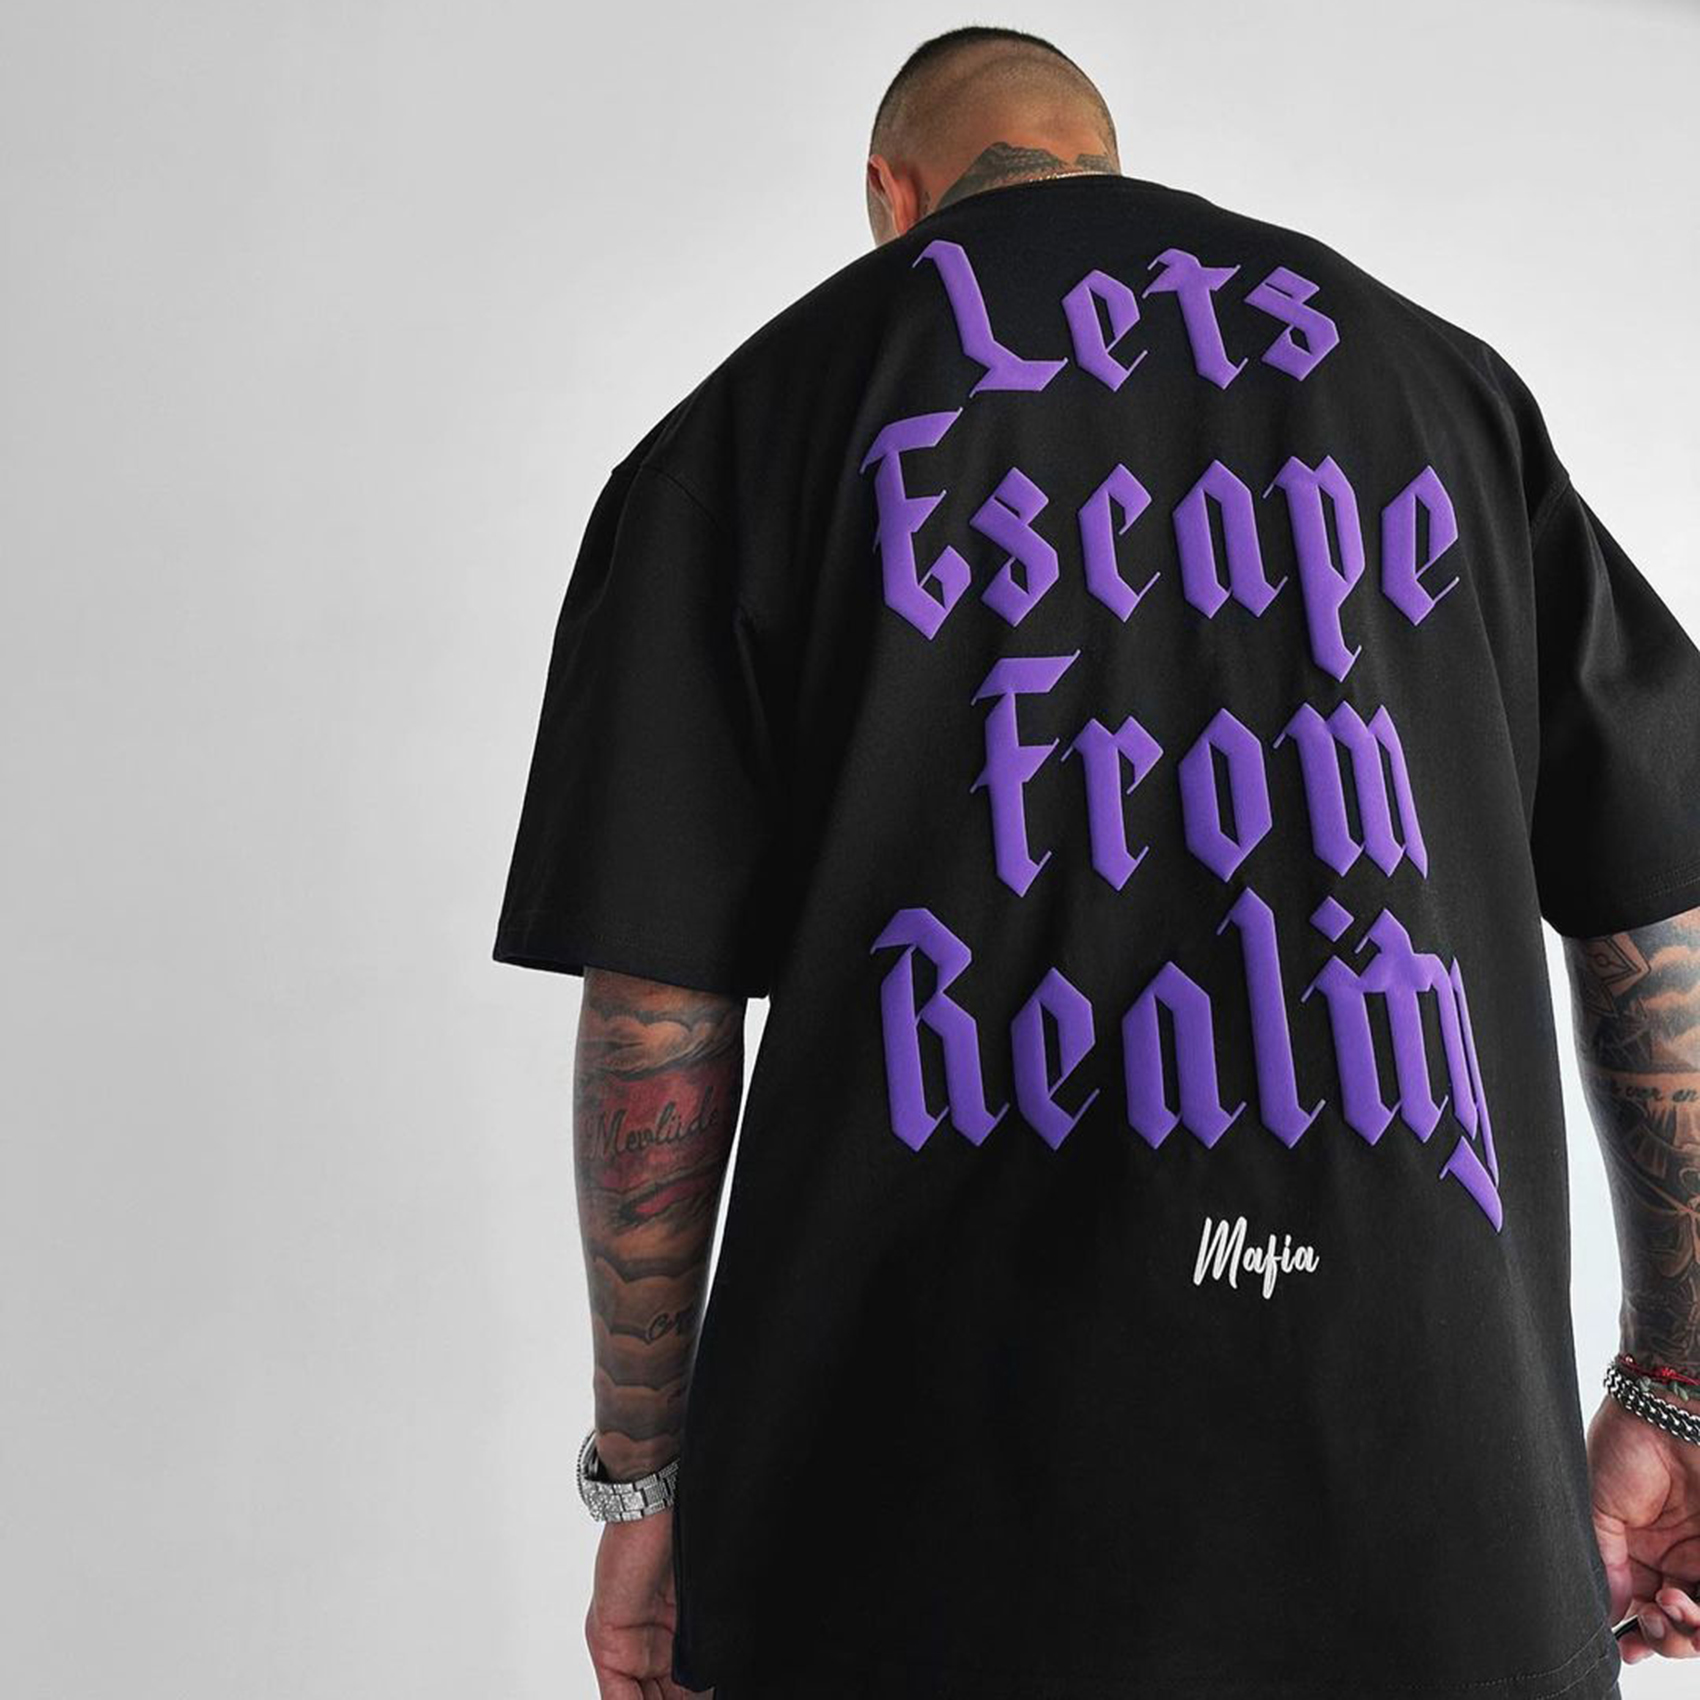 Oversized Men's Let's Escape From Reality Short Sleeve T-Shirt